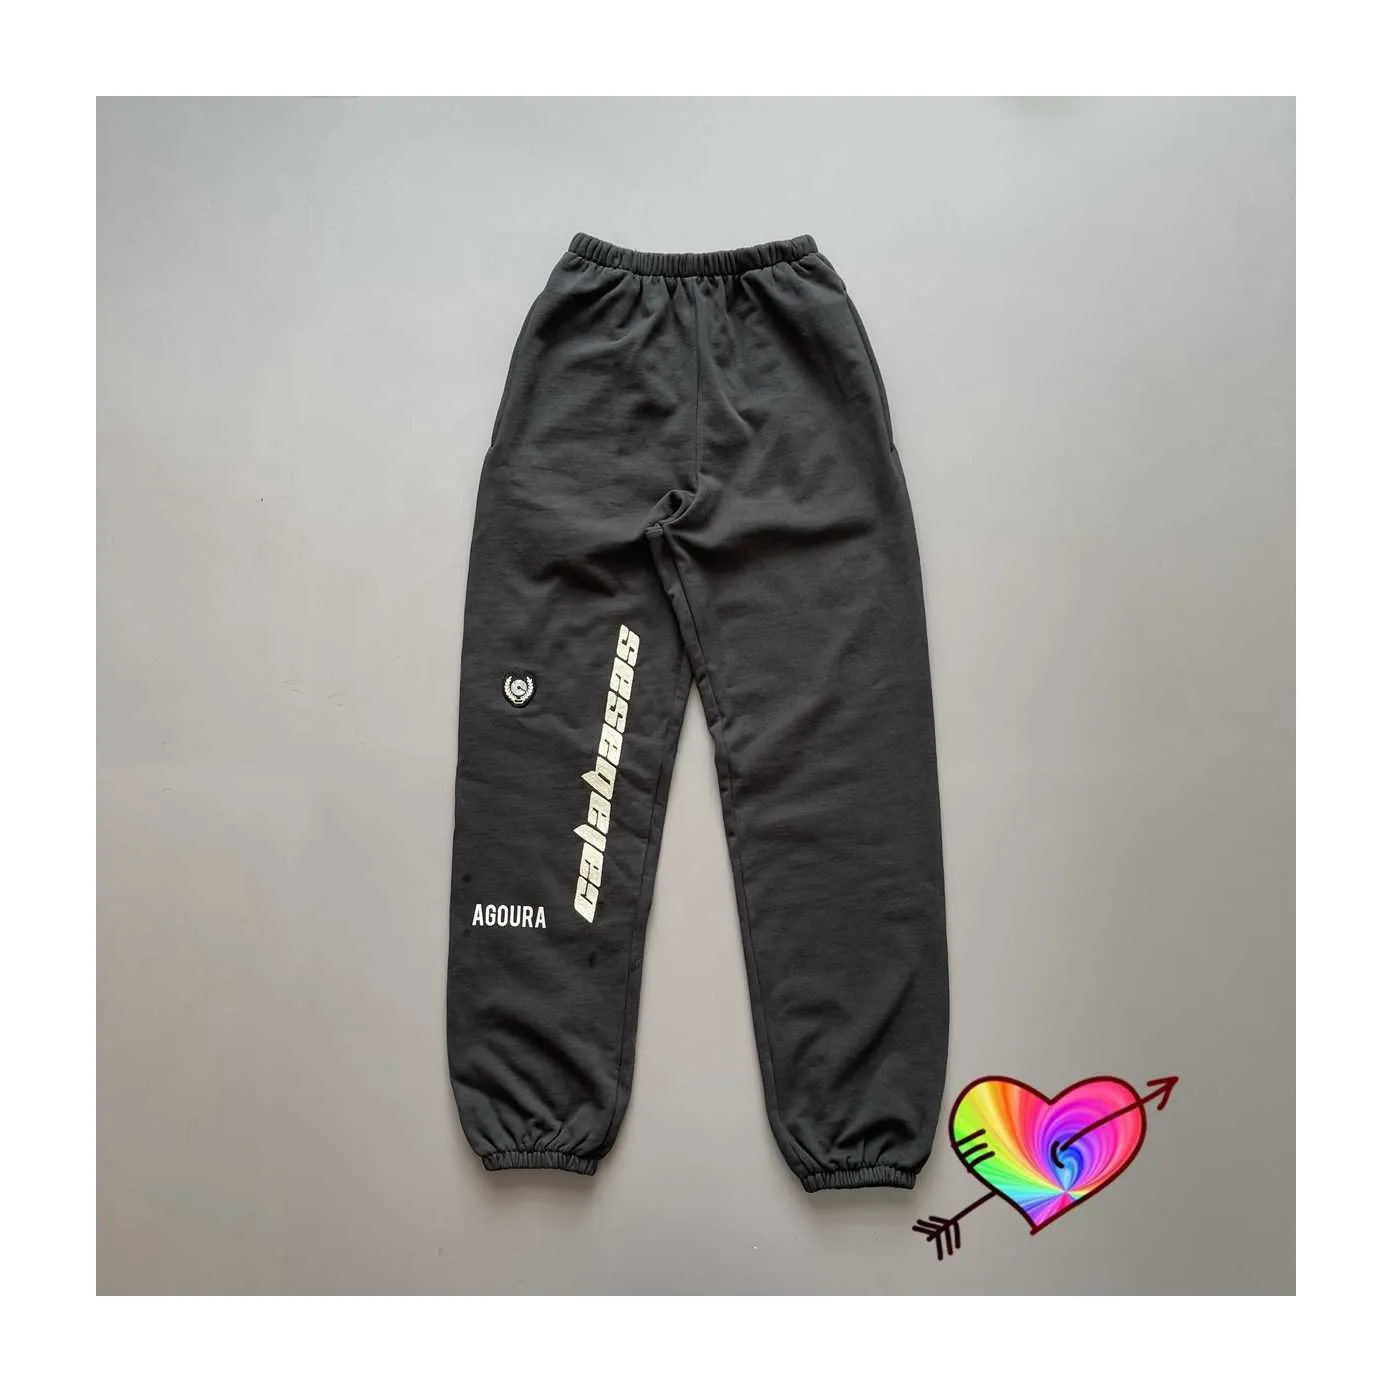 2021 Season 5 Pants Men Women High Quality Embroidery Calabasas Sweatpants Slightly Loose Terry Jogger Trousers X0628